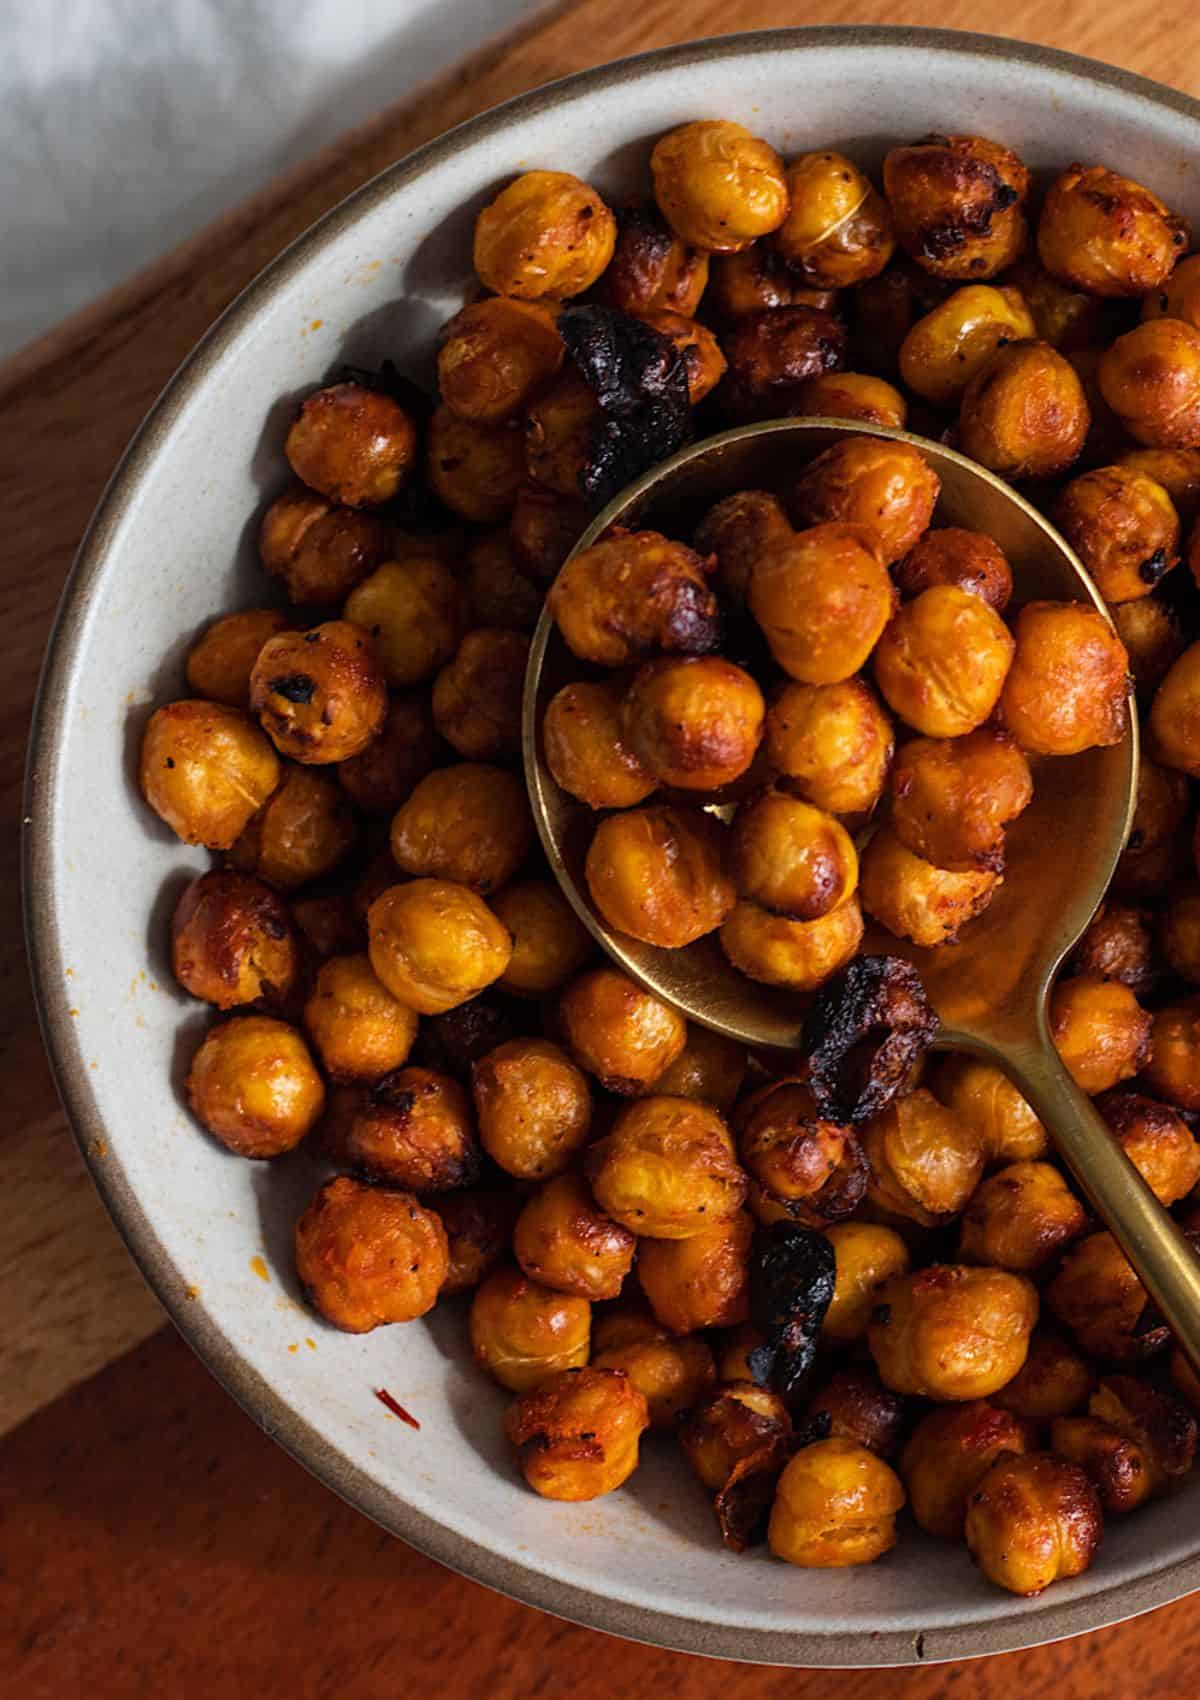 Dark orange colored chickpeas in a bowl with a spoon full of chickpeas.